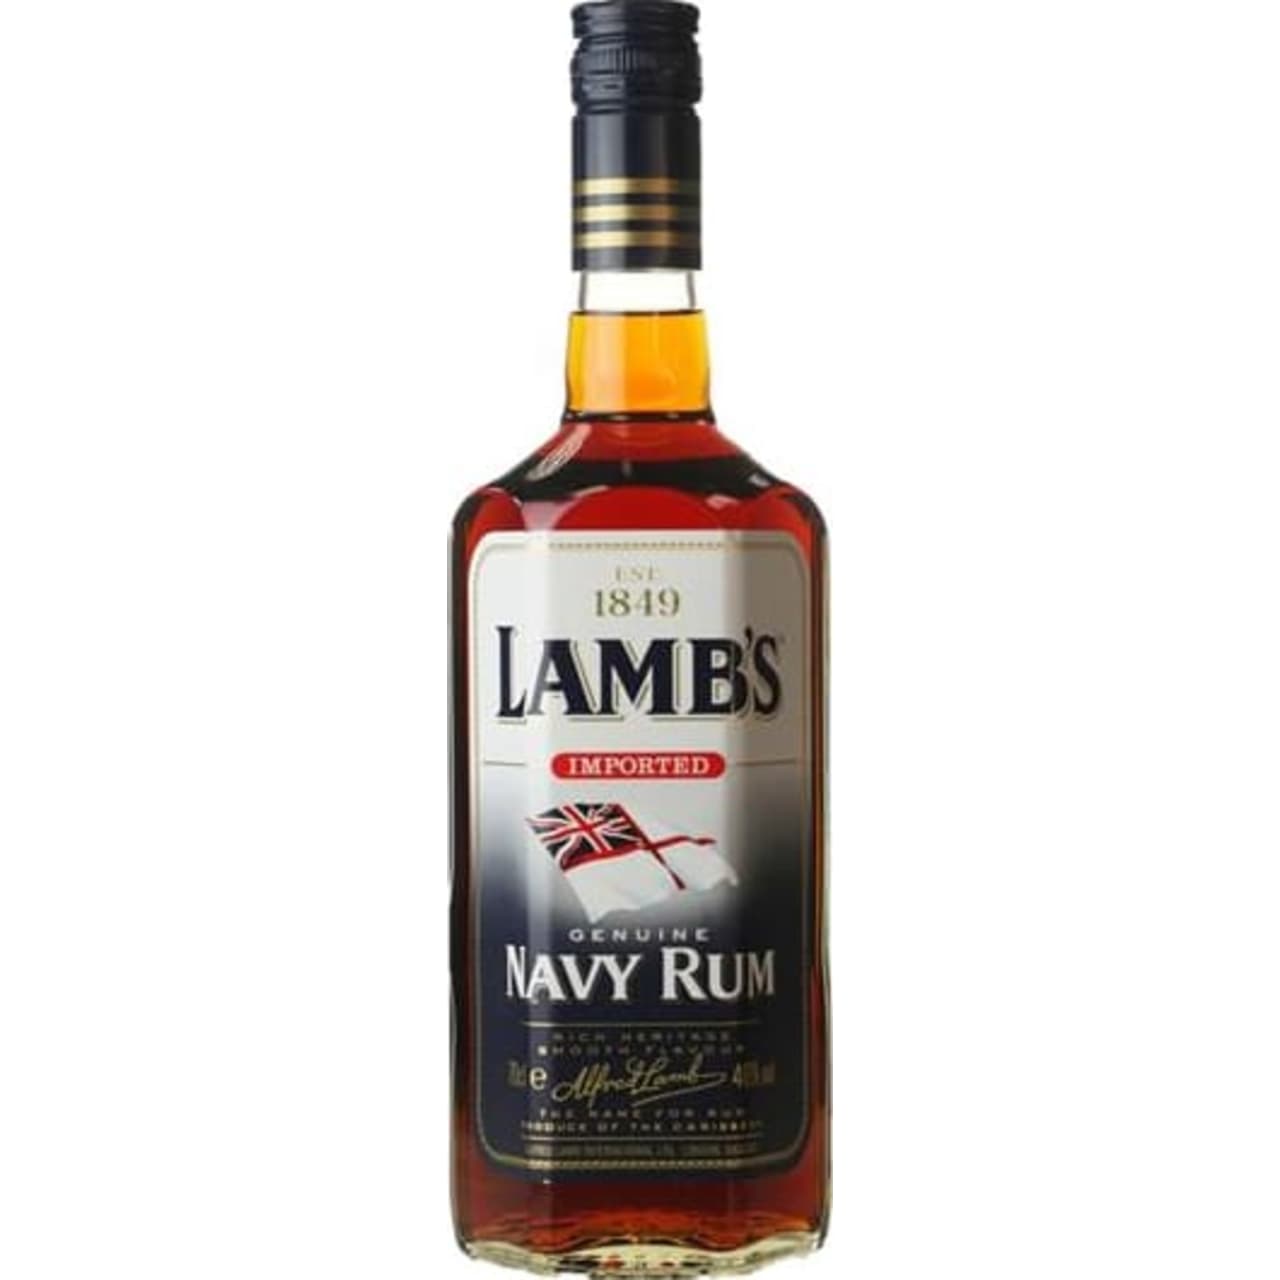 A Caribbean blend of eighteen rums from various islands including Trinidad and Guyana, Lamb's is a dark, tannic, traditional Navy rum.